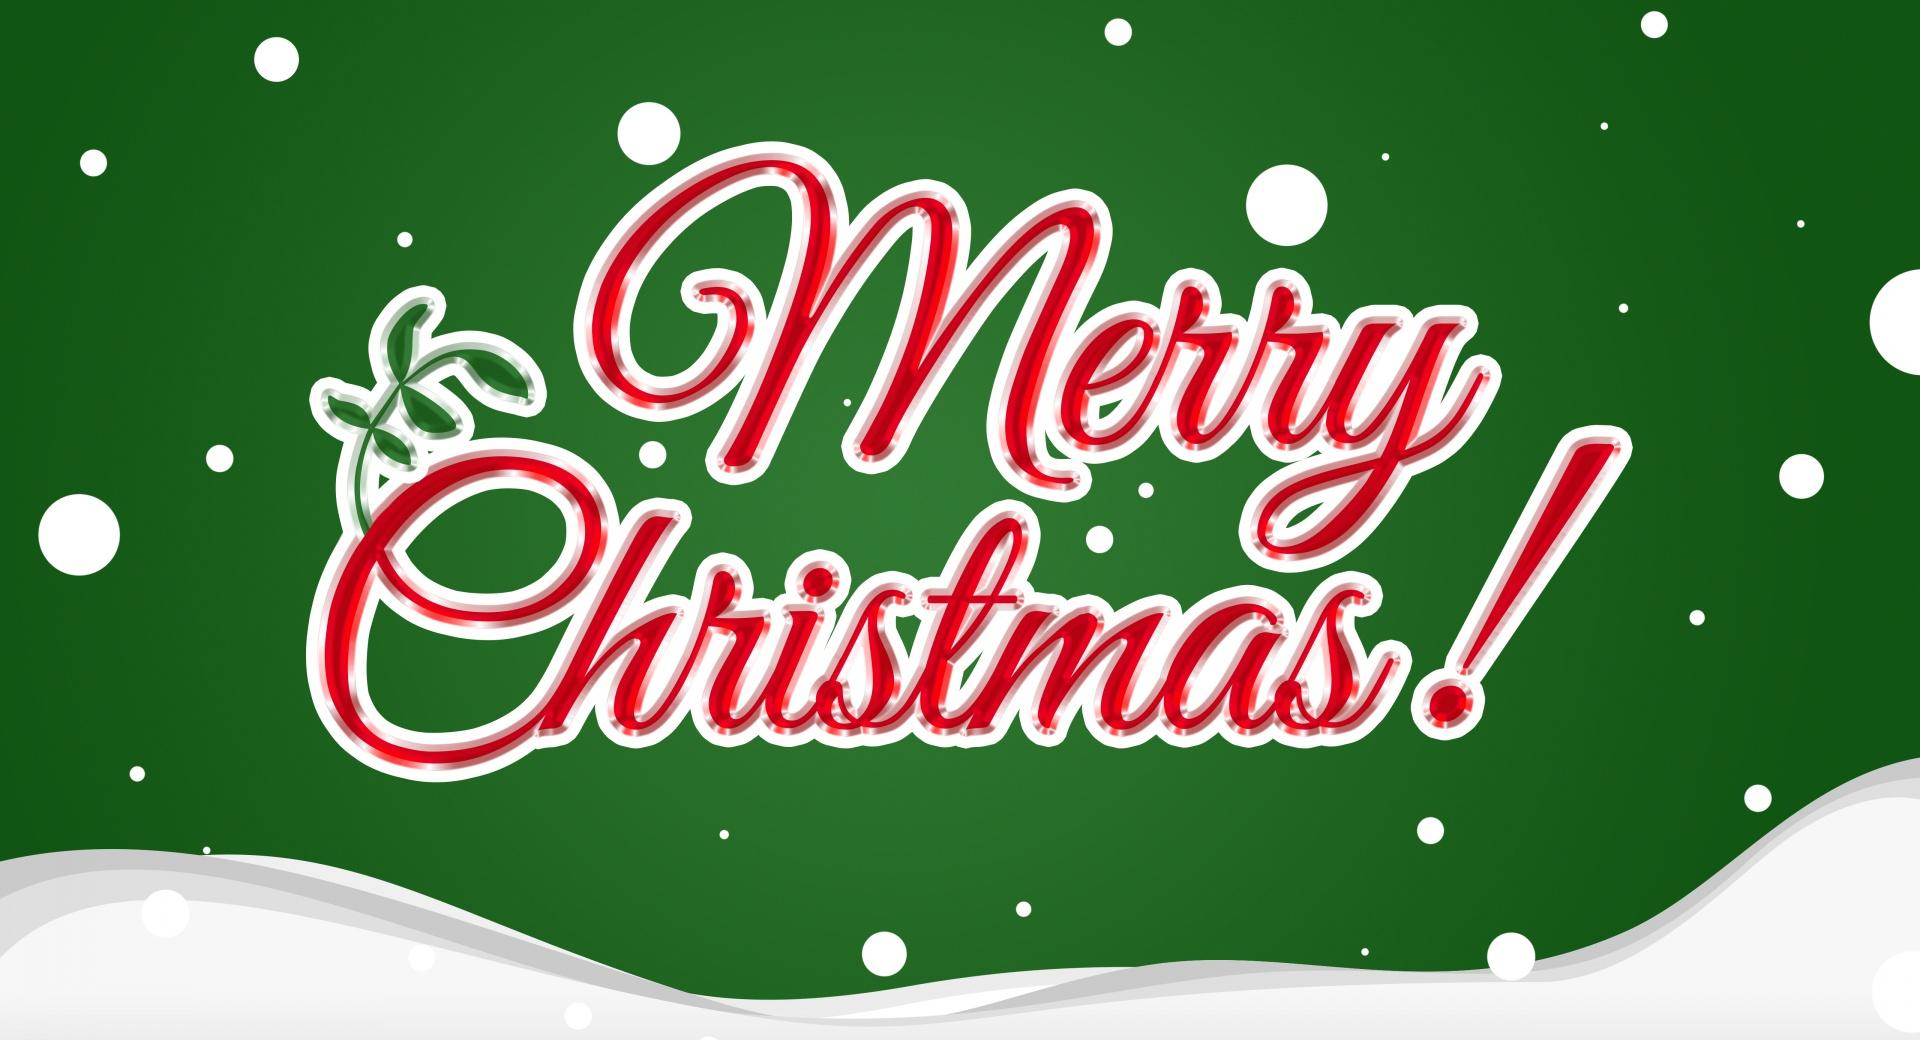 Merry Christmas Card 2016 wallpapers HD quality